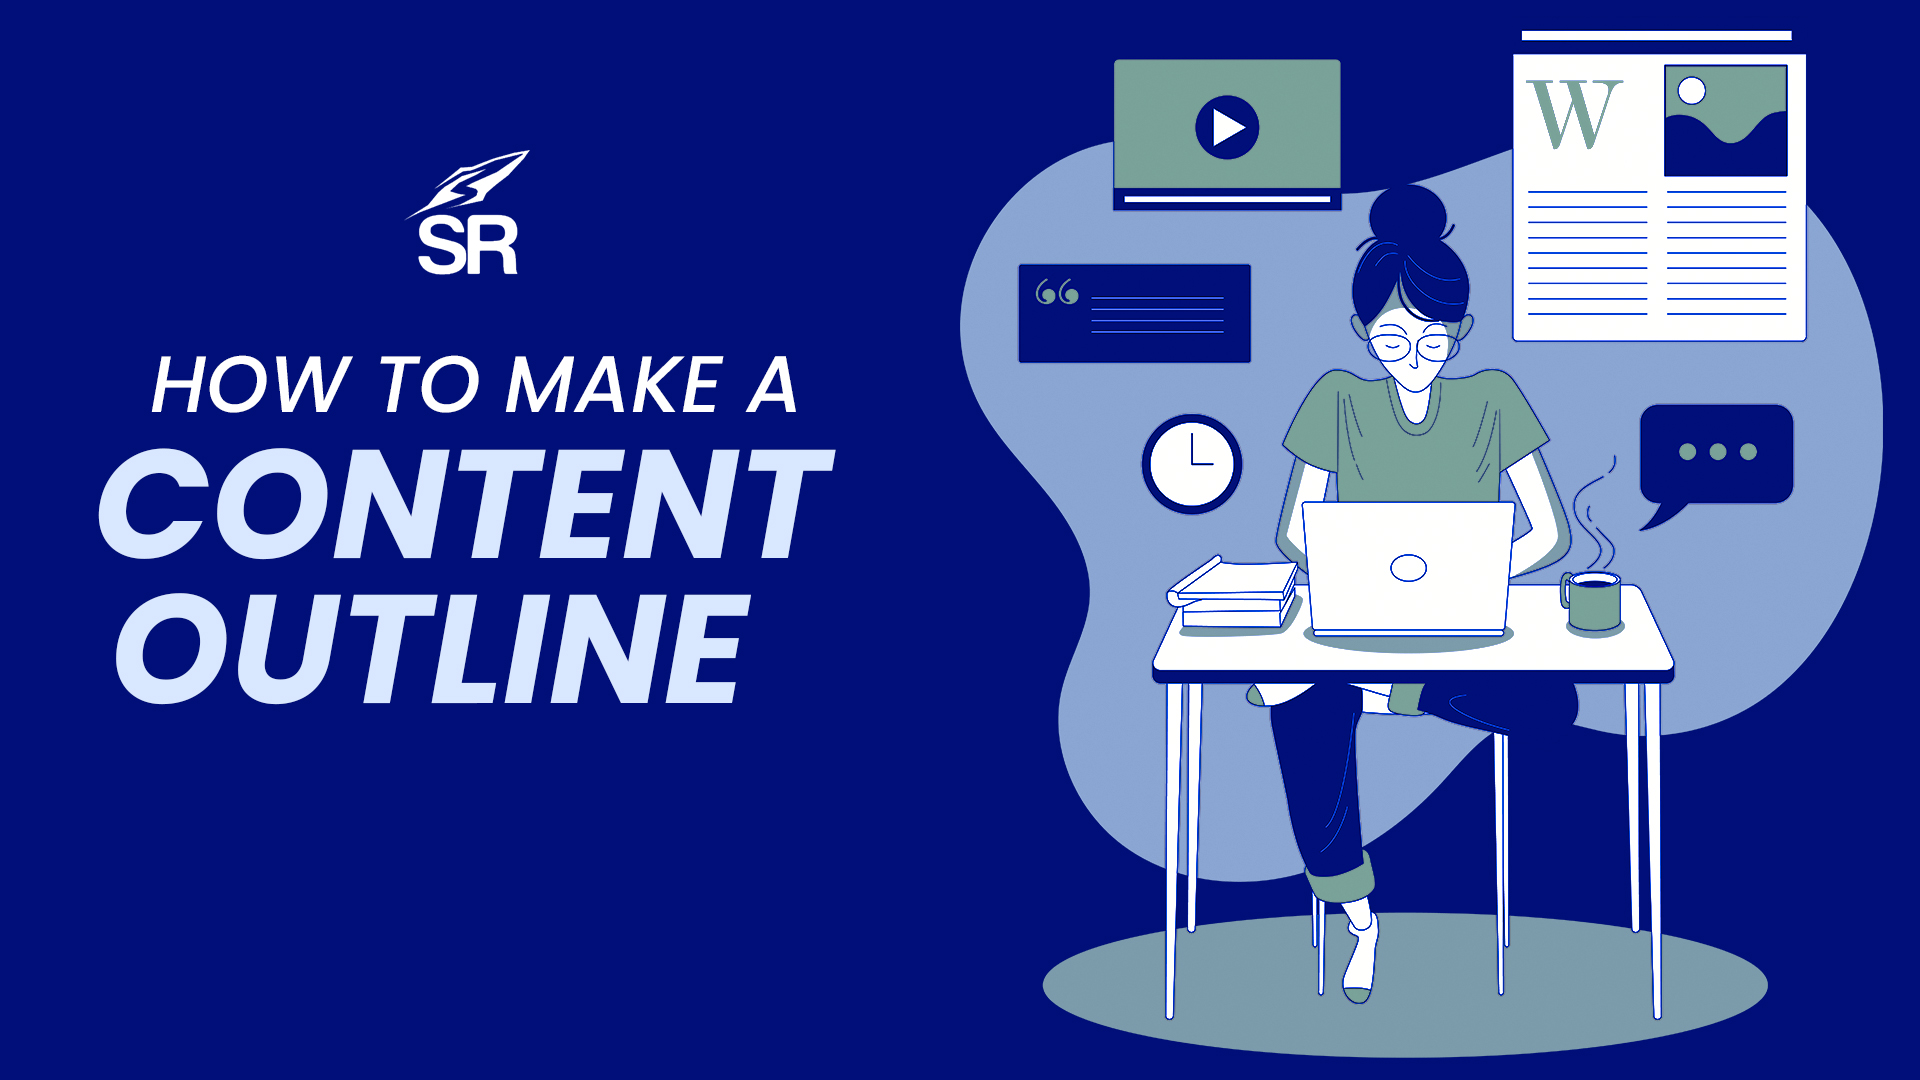 How to Make A Content Outline (5 Easy Steps)